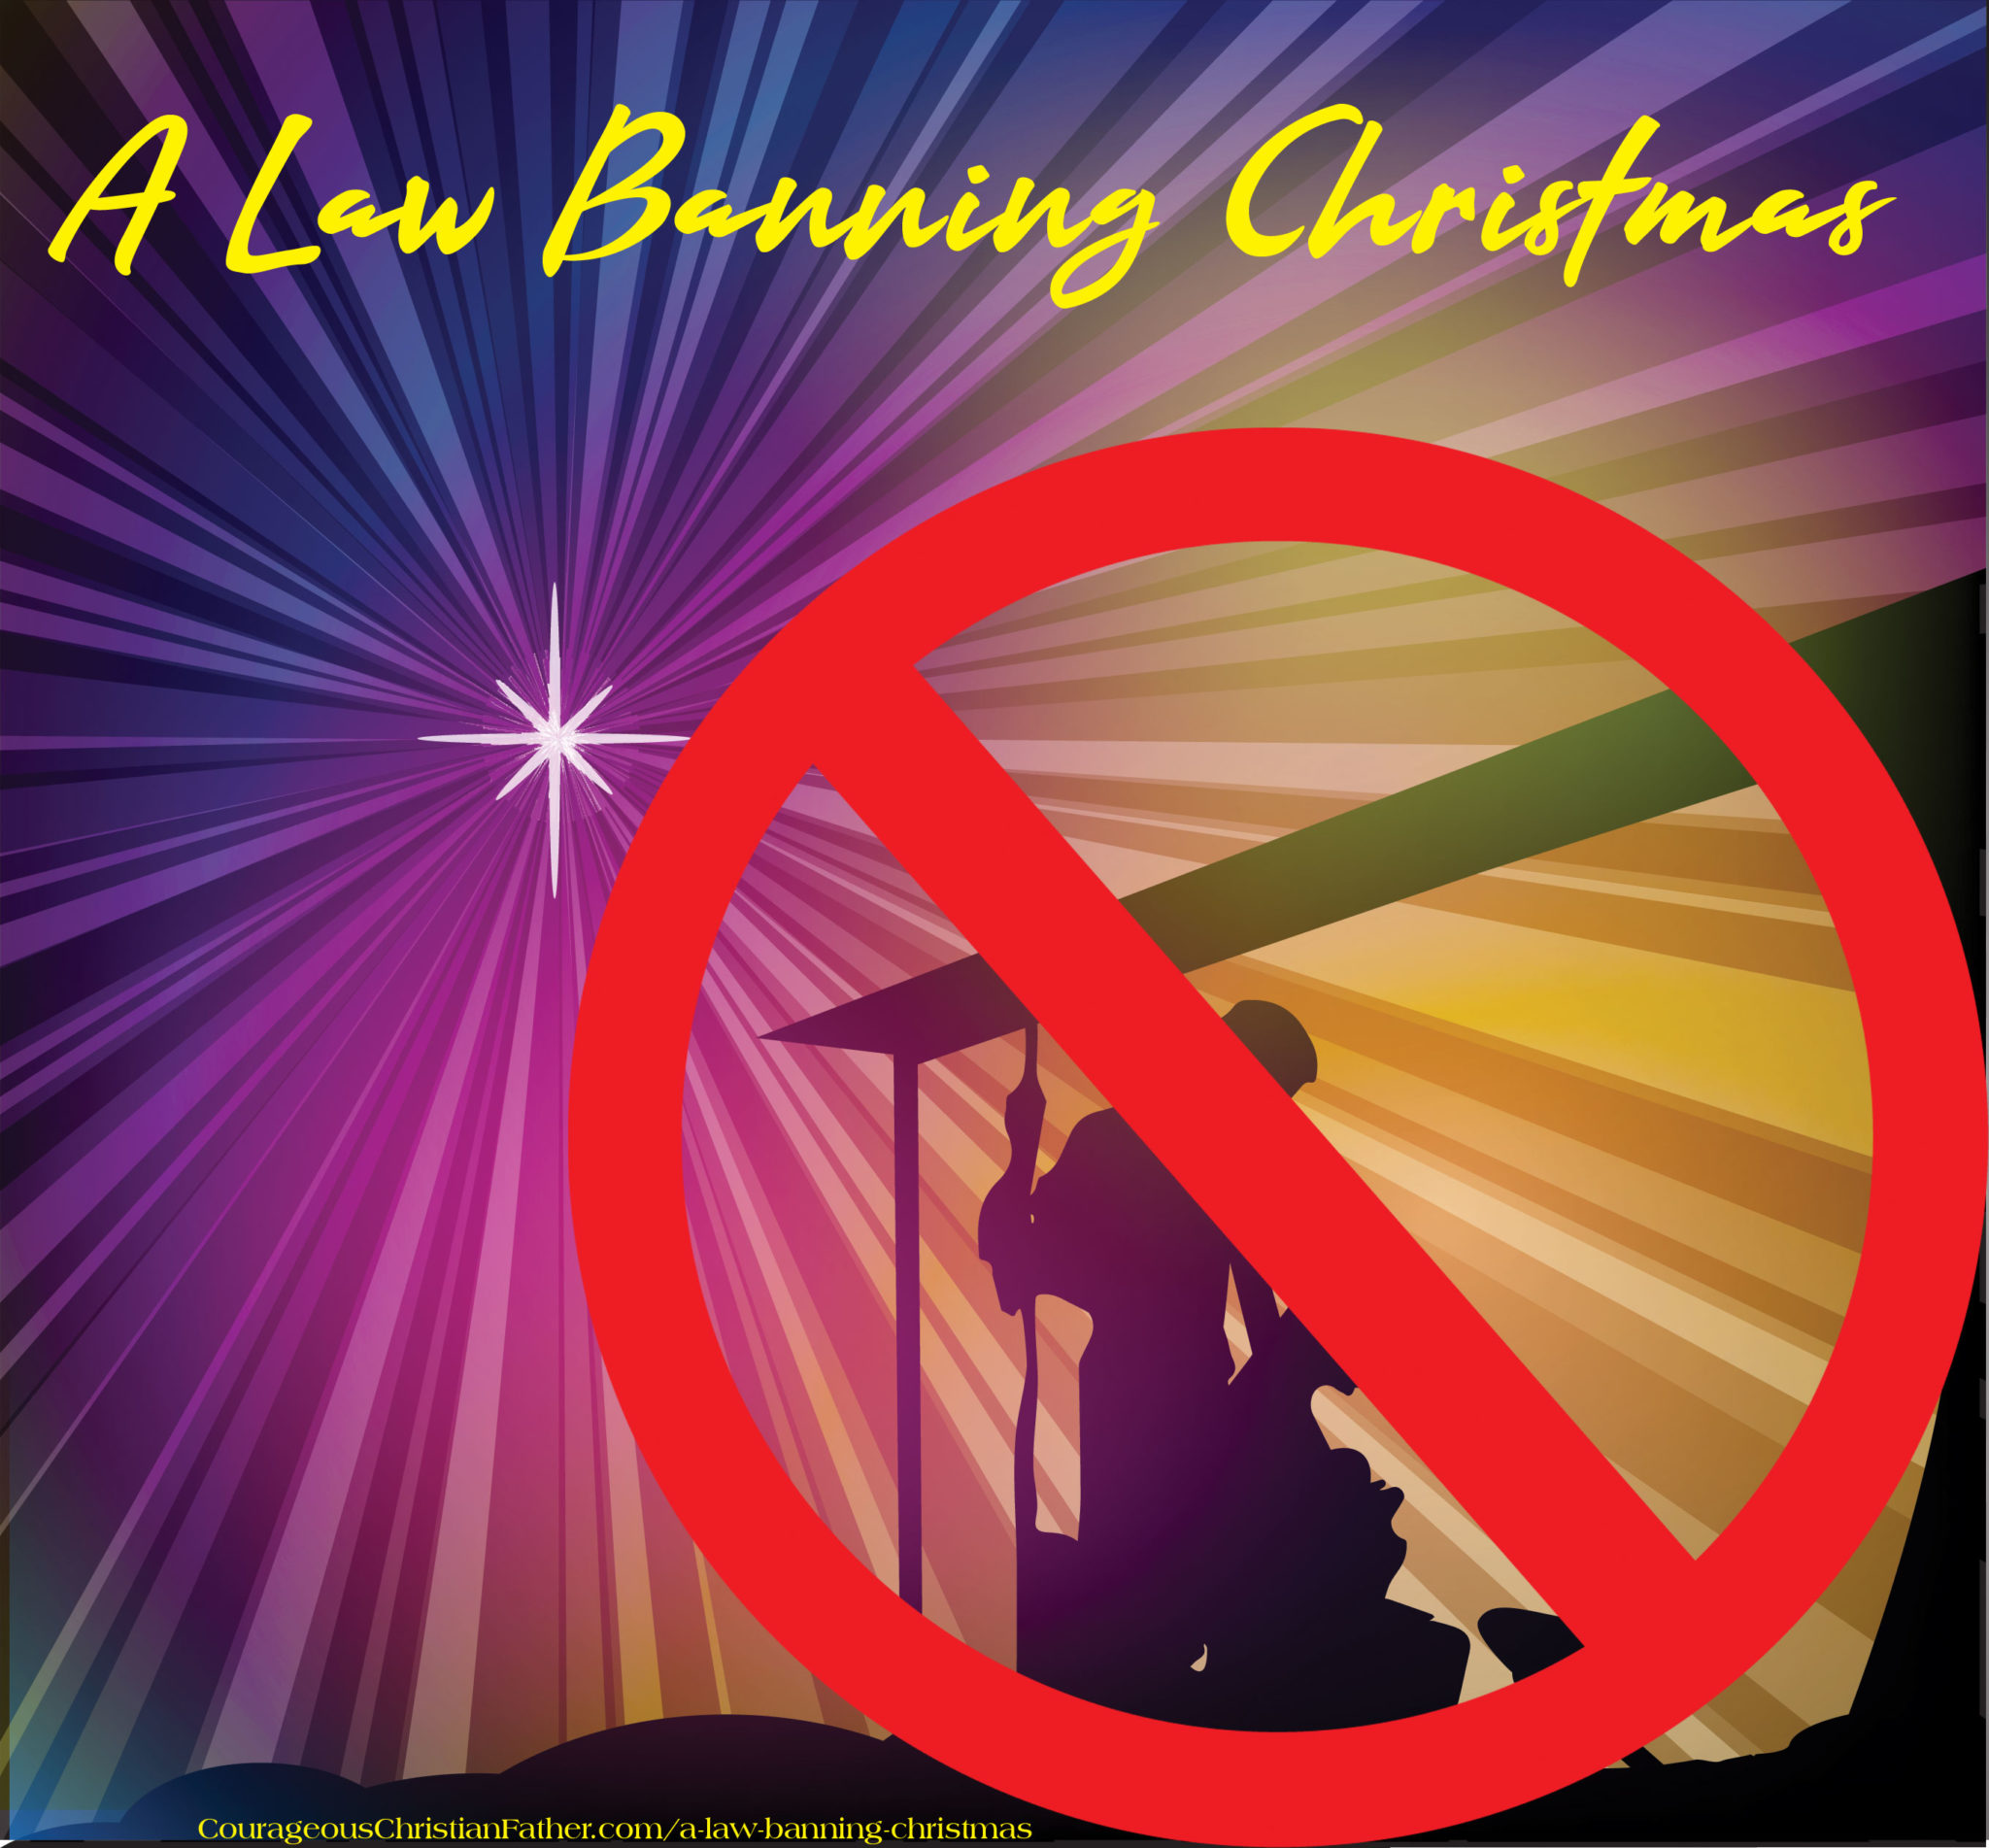 A Law Banning Christmas - Future America and Christmas is banned in our country that was once free. You cannot celebrate it or even talk about Christmas.